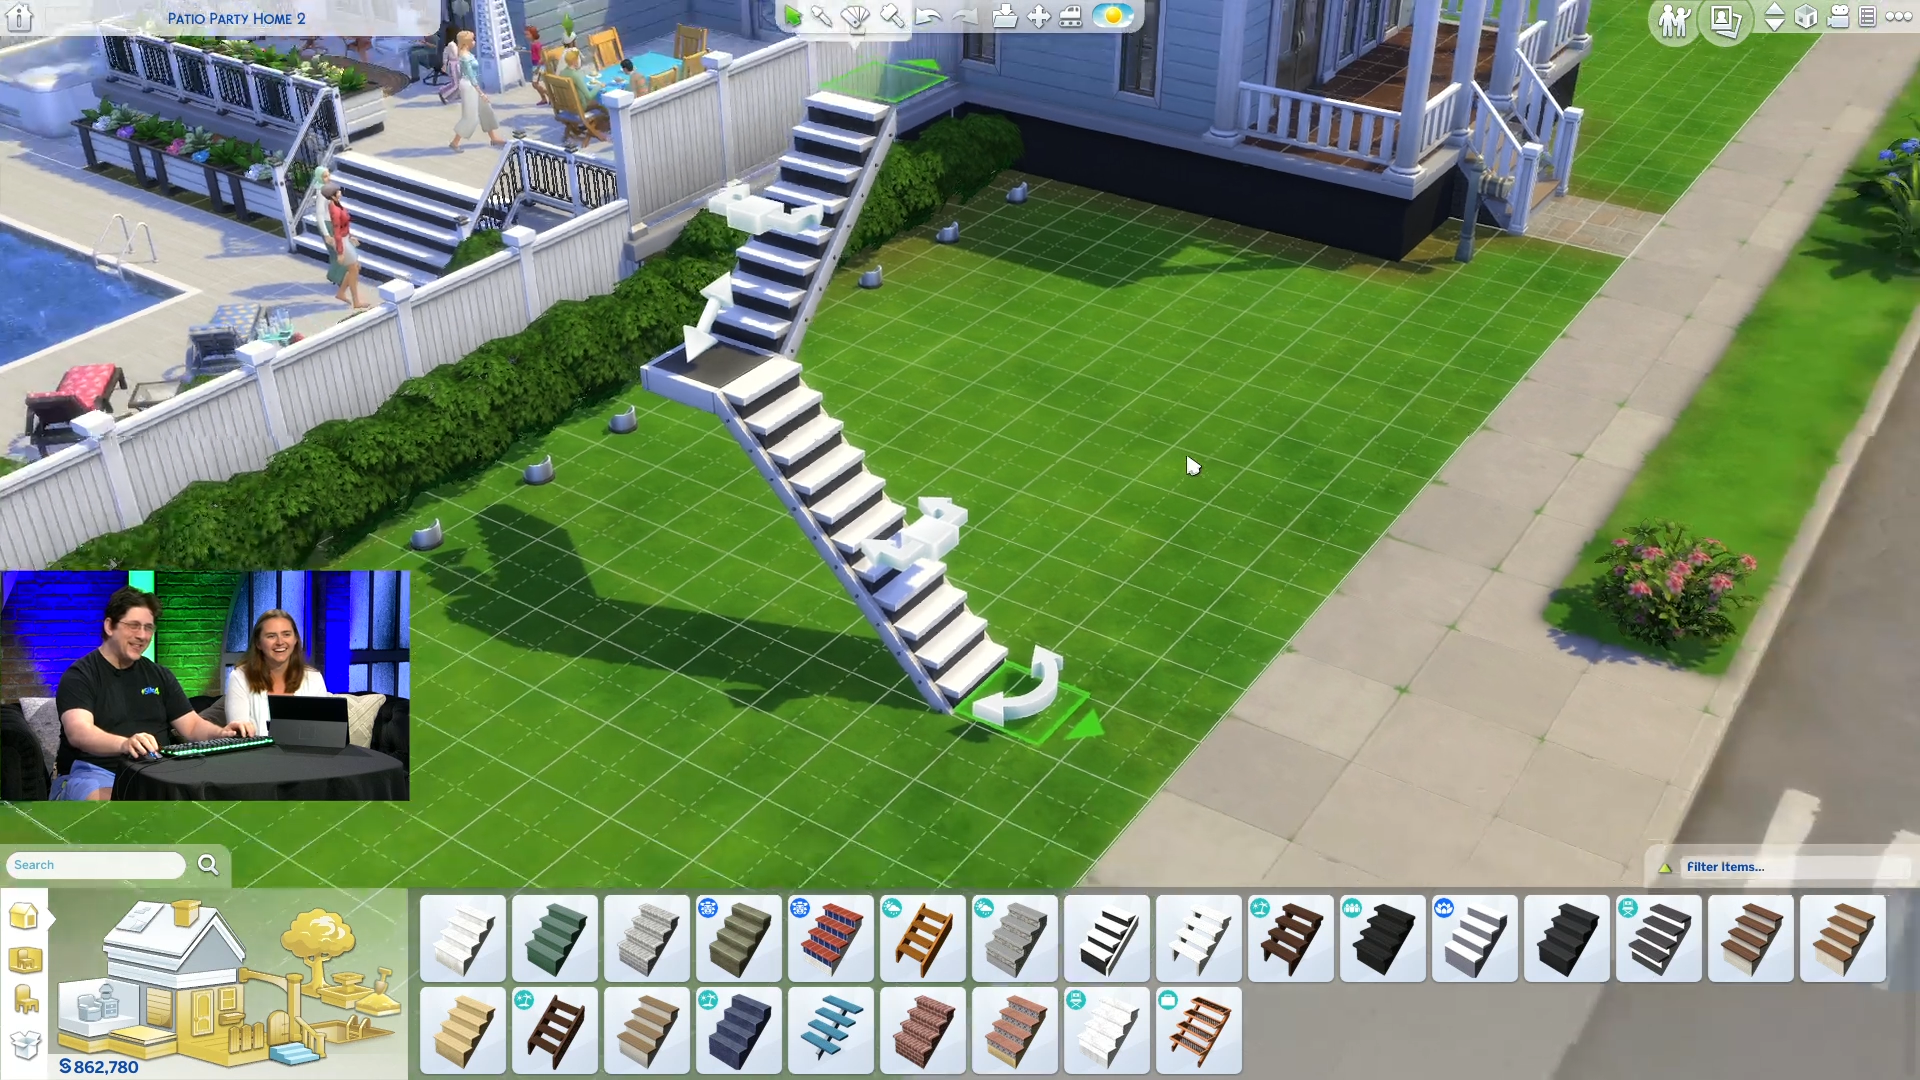 Configurable Stairs Coming to The Sims 4 | SimsVIP